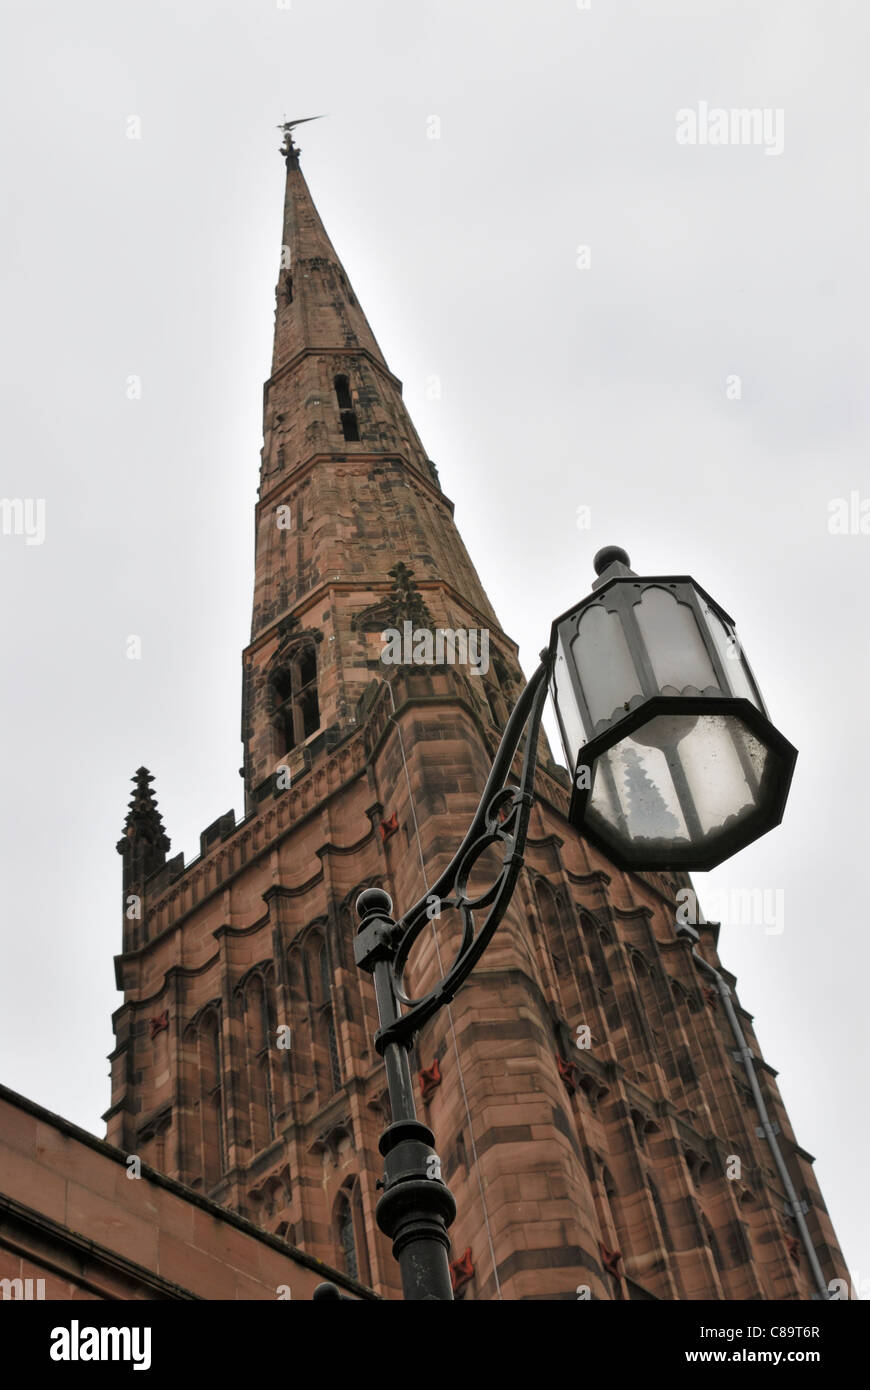 View of old religious architecture of the present church spire, Coventry Stock Photo